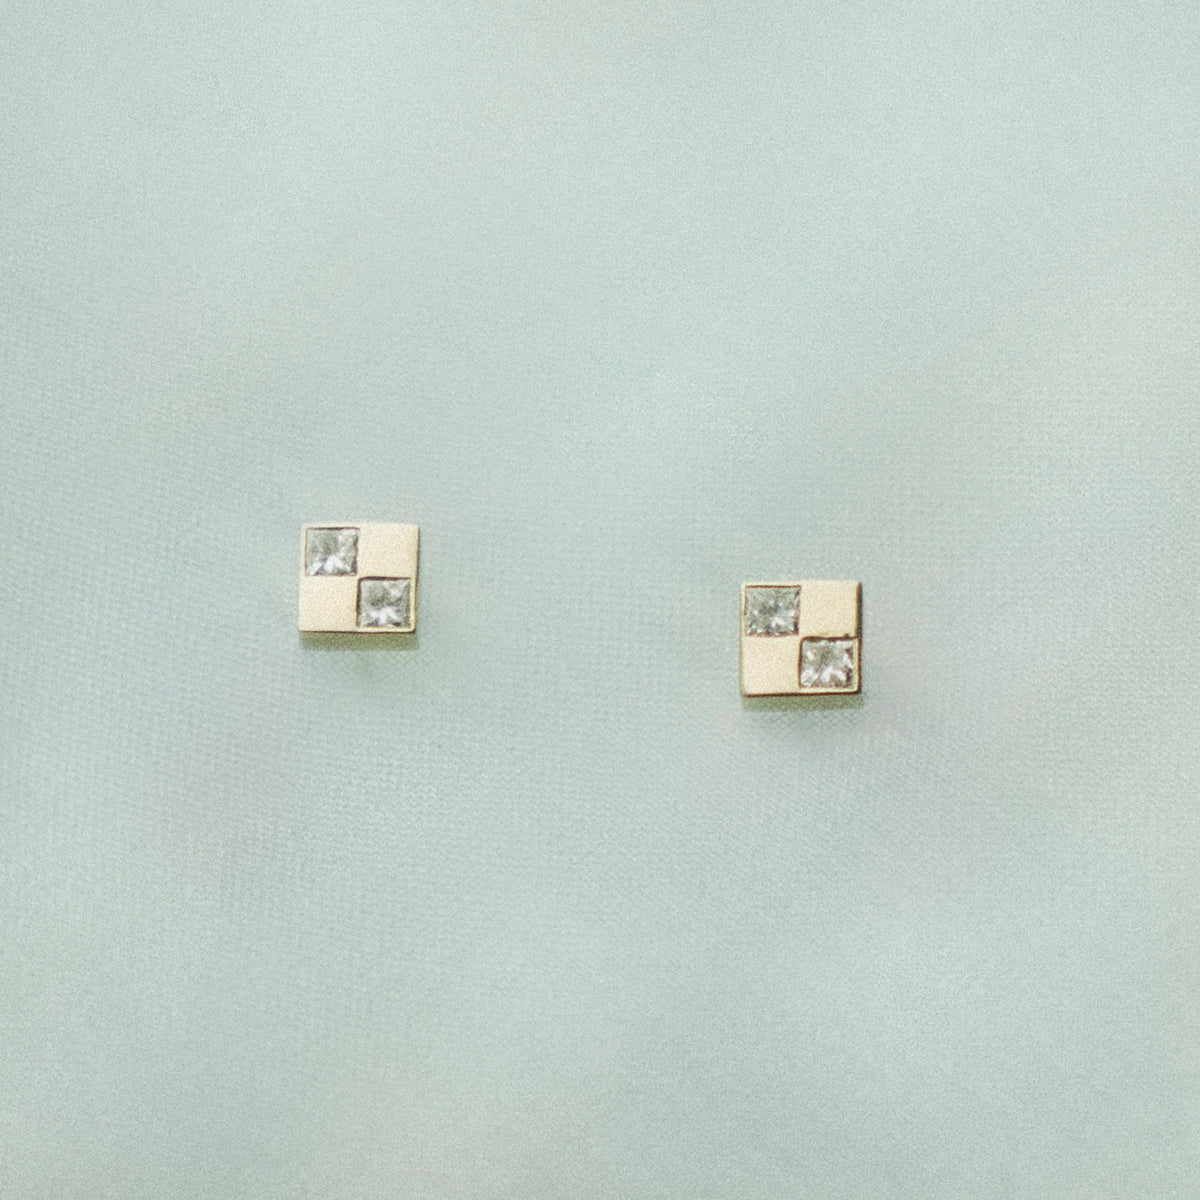 Designer Sudu Stud Earrings in 14k Yellow Gold and Natural White Diamonds by SHW fine Jewelry in NYC